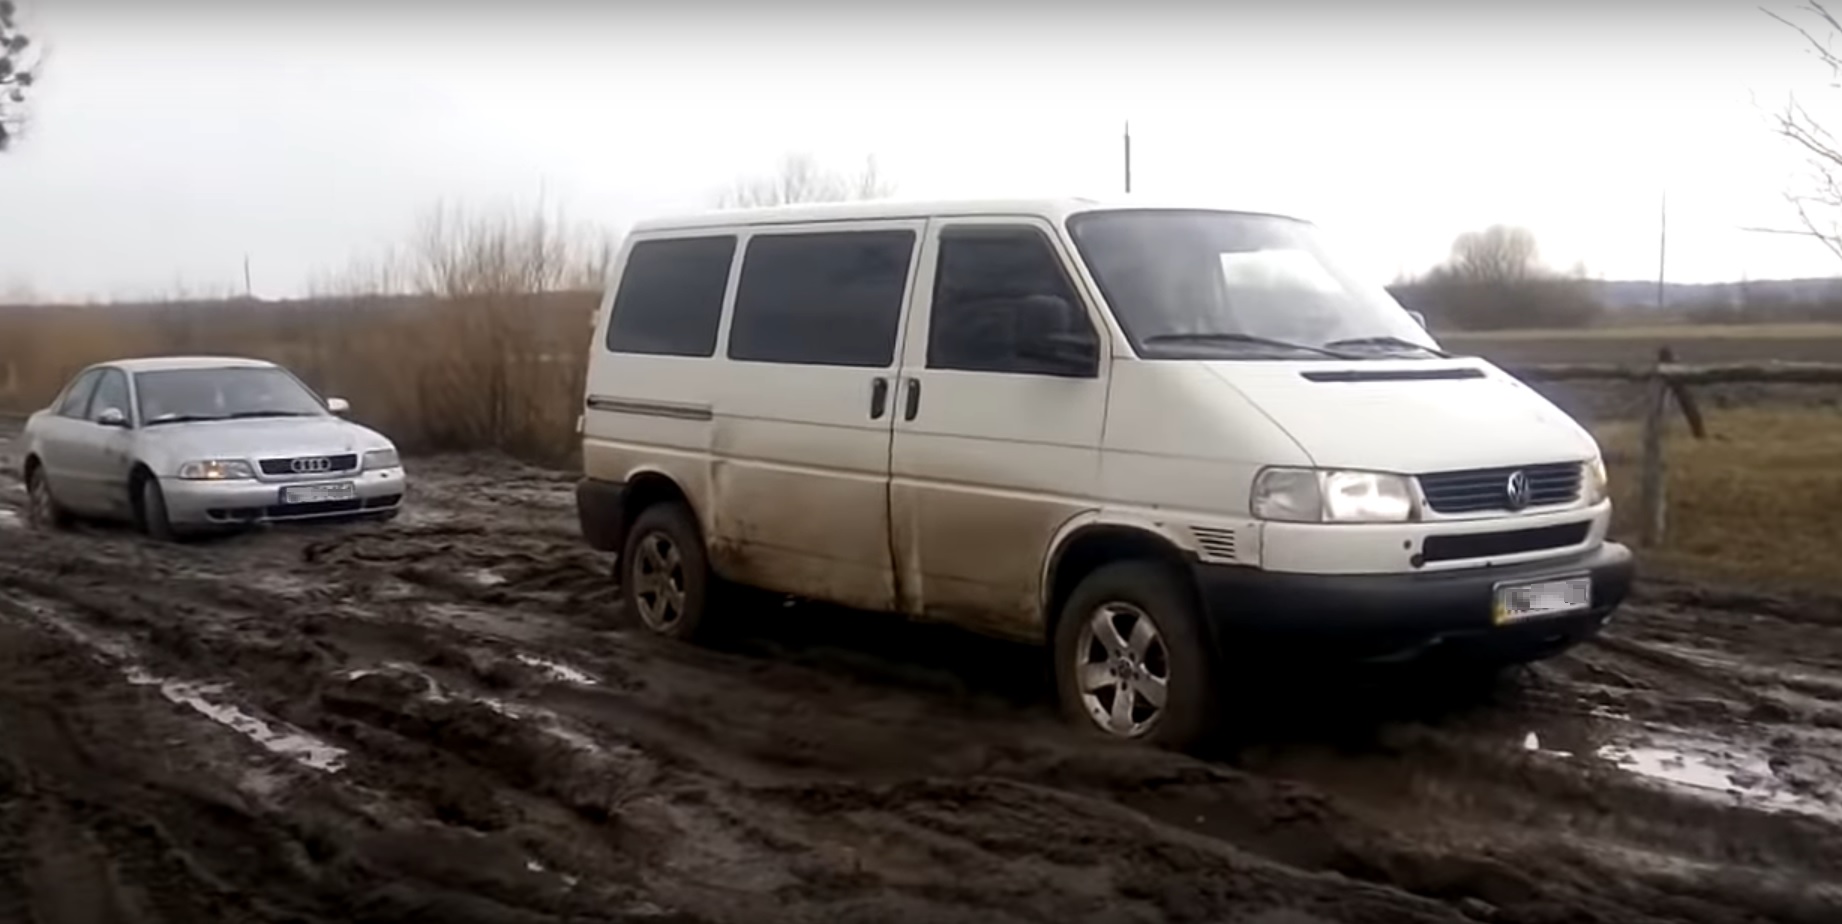 VW Transporter T4 Syncro off-road